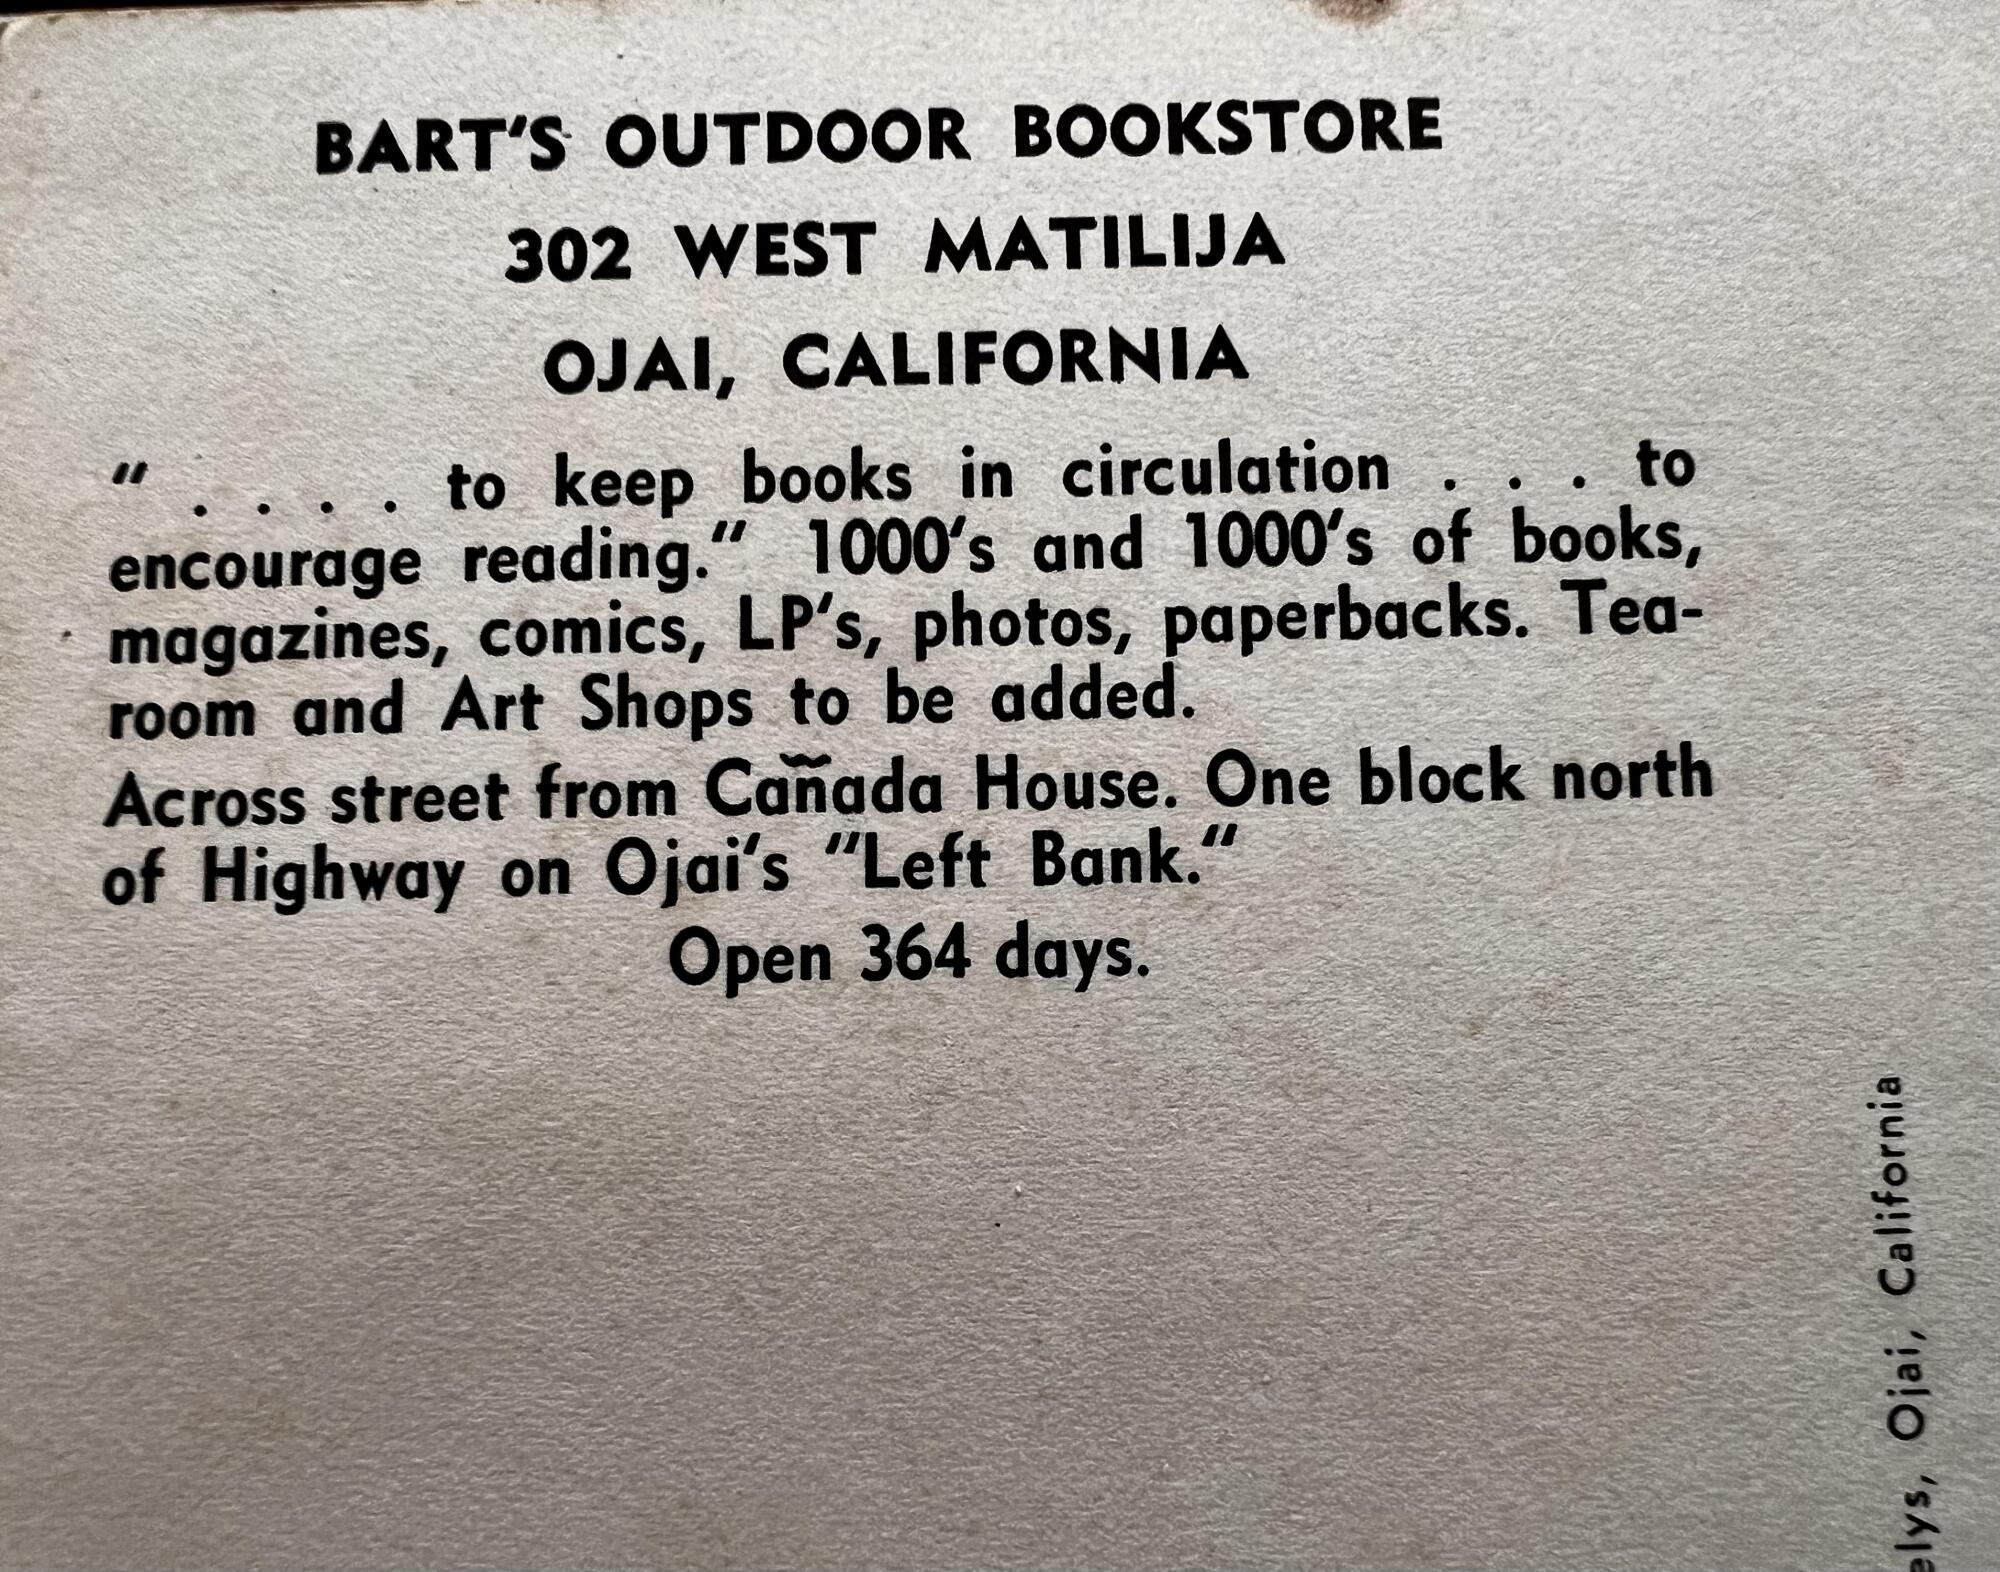 Back of a postcard, which includes the text: Bart's Outdoor Bookstore ... One block north of Highway on Ojai's 'Left Bank.'"